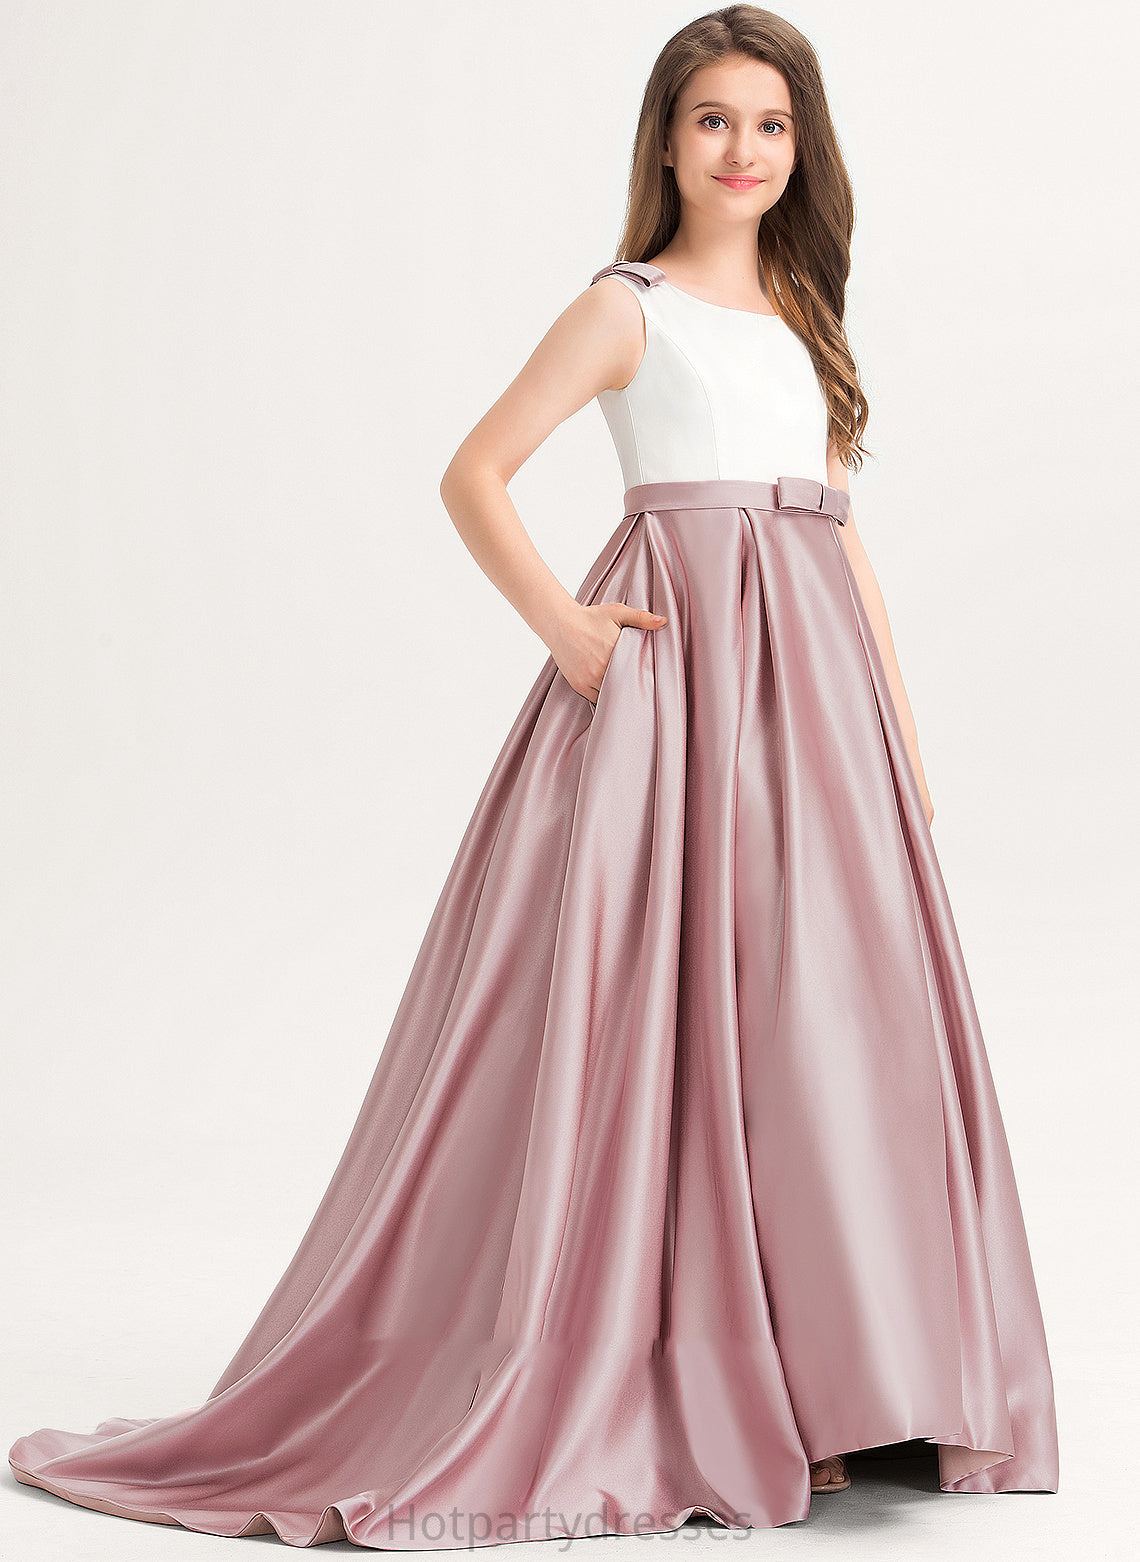 Scoop Bow(s) With Ball-Gown/Princess Train Neck Danielle Pockets Junior Bridesmaid Dresses Sweep Satin